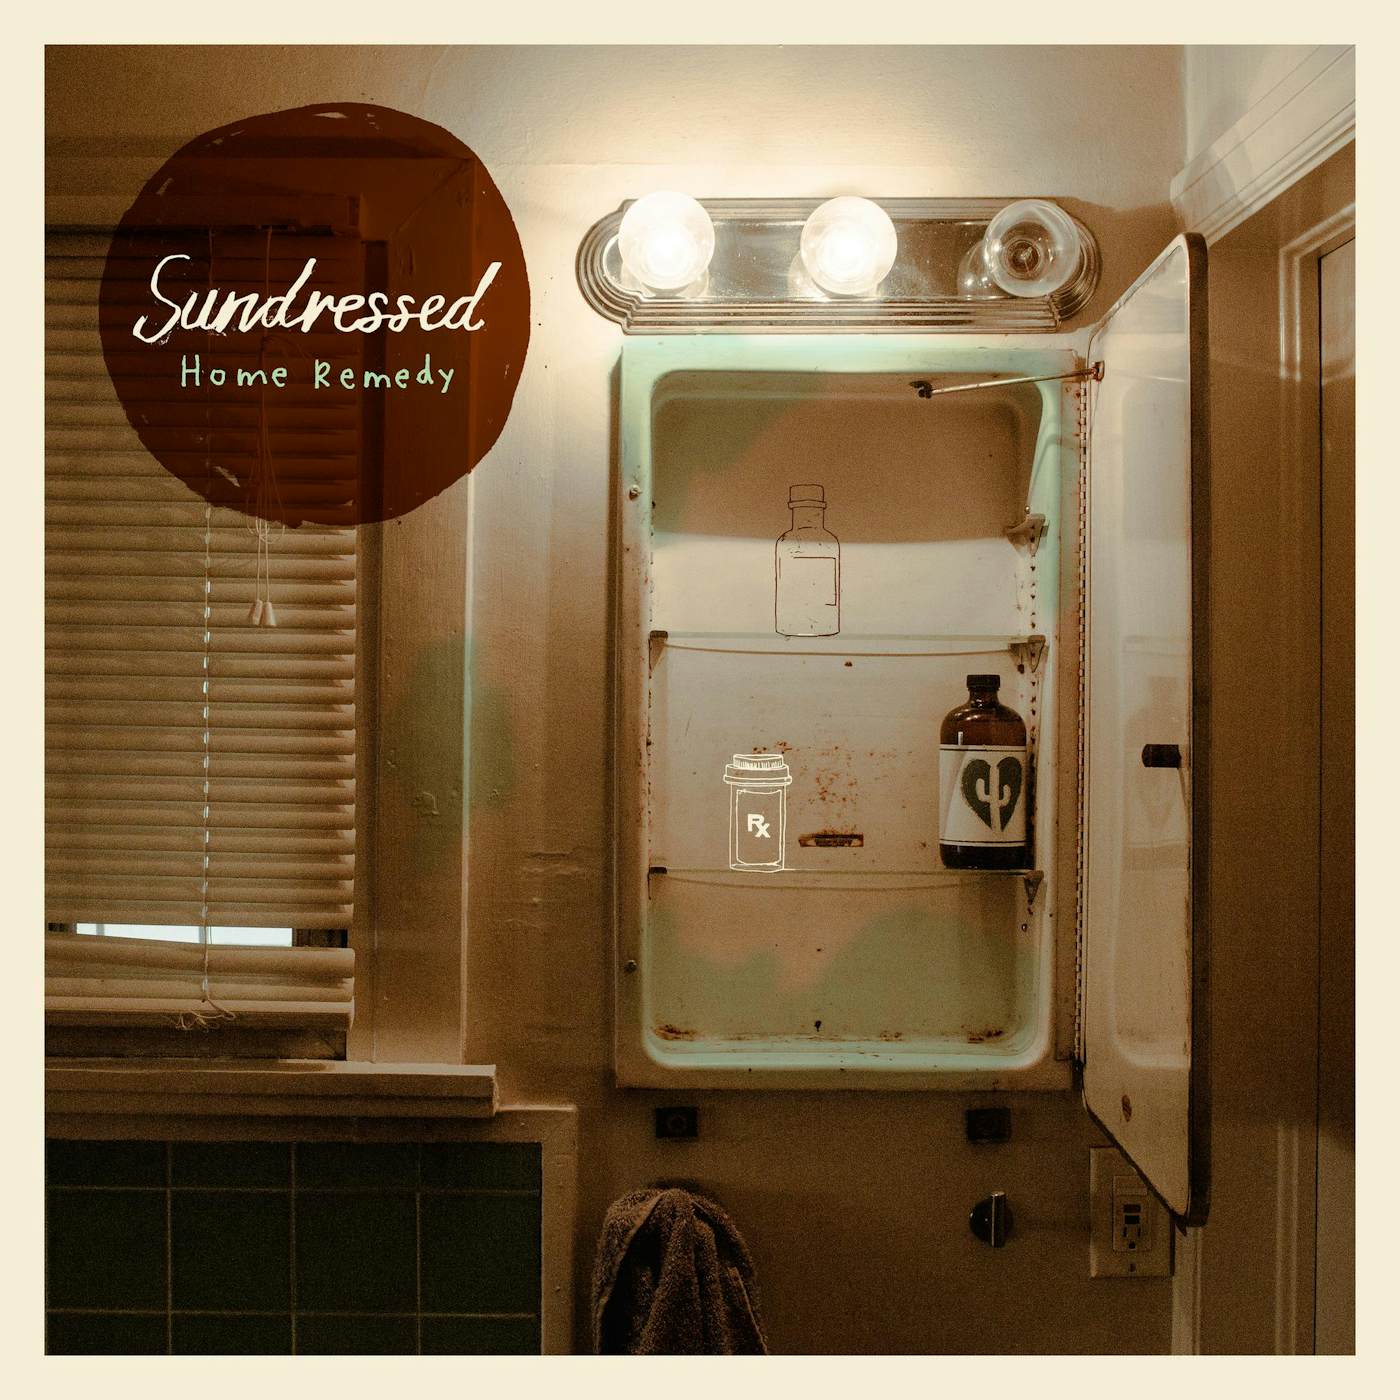 Sundressed Home Remedy CD